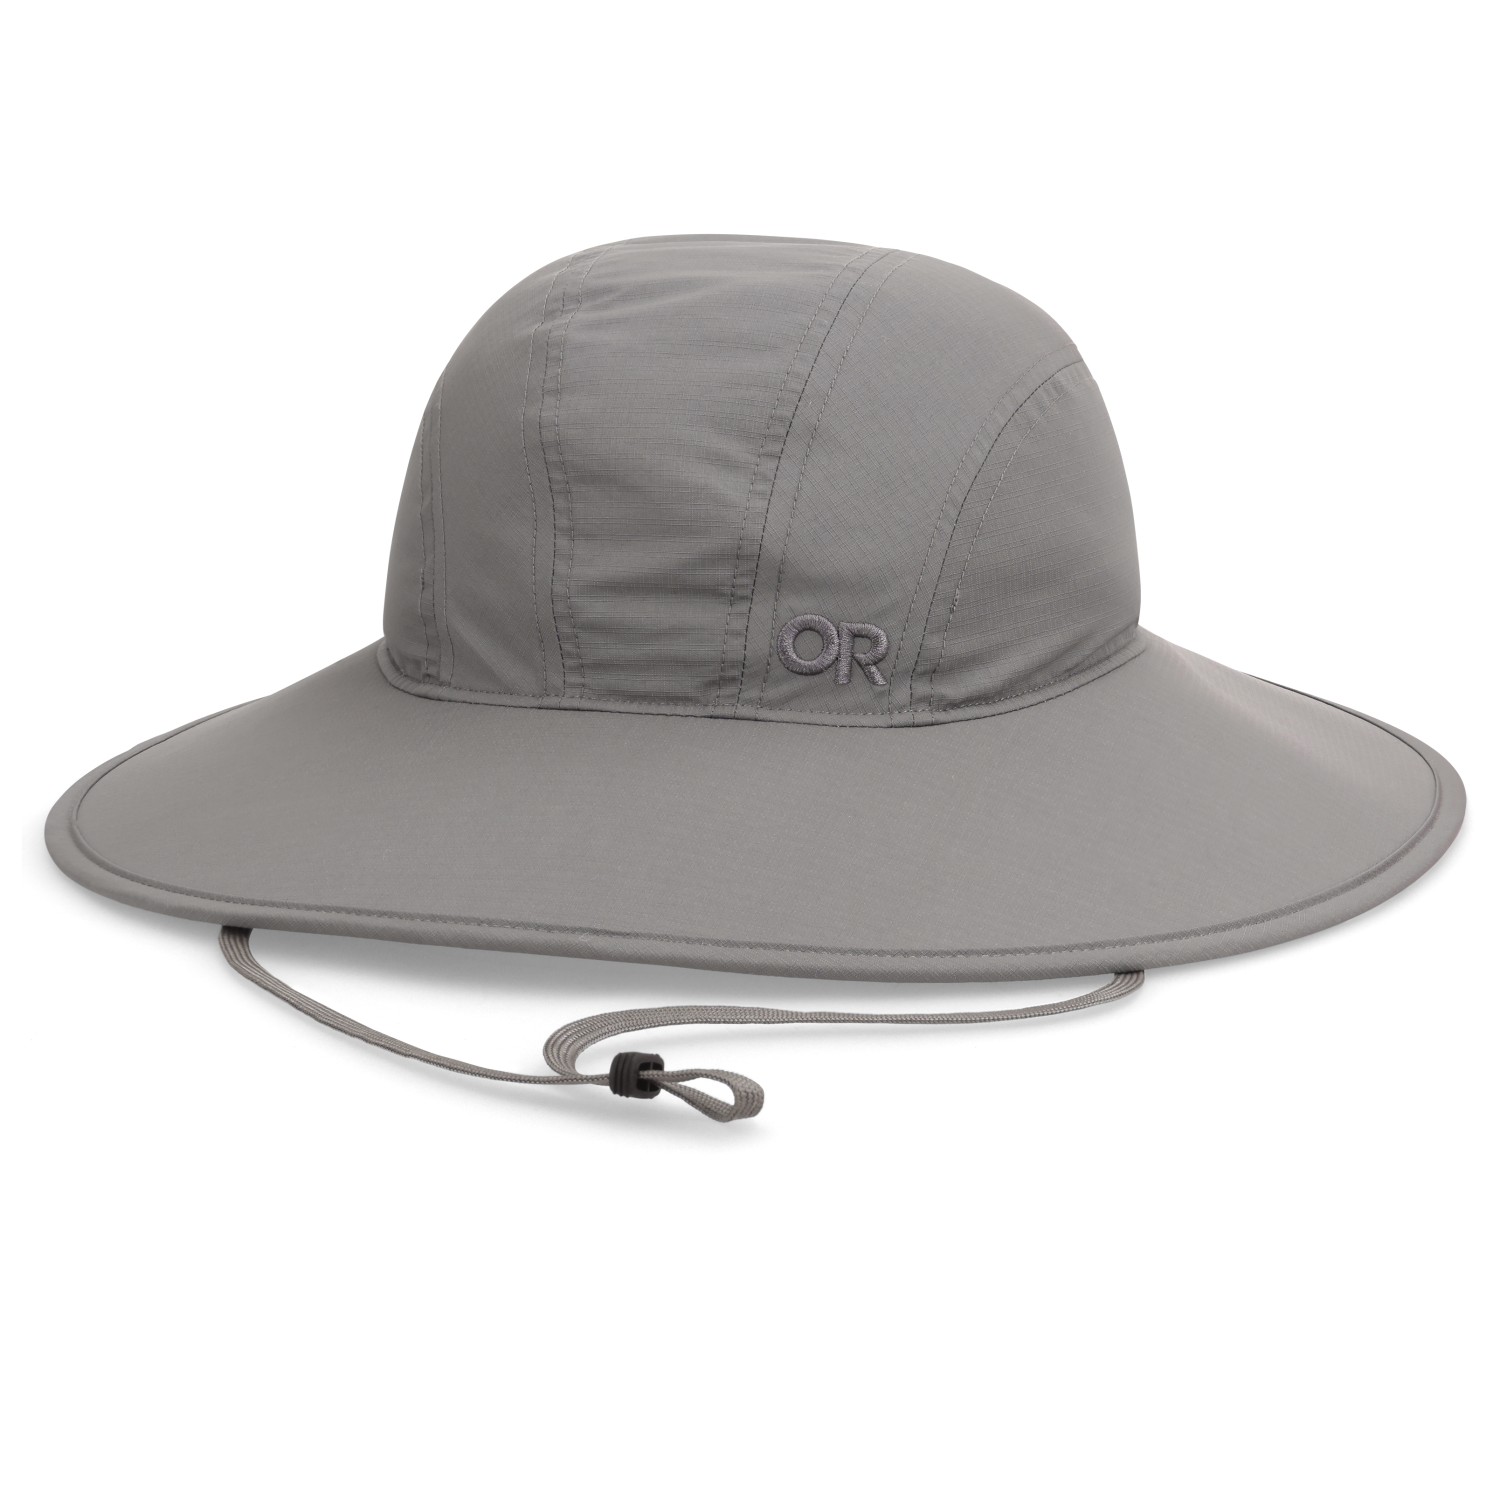 Кепка Outdoor Research Women's Oasis Sun Hat, цвет Pewter